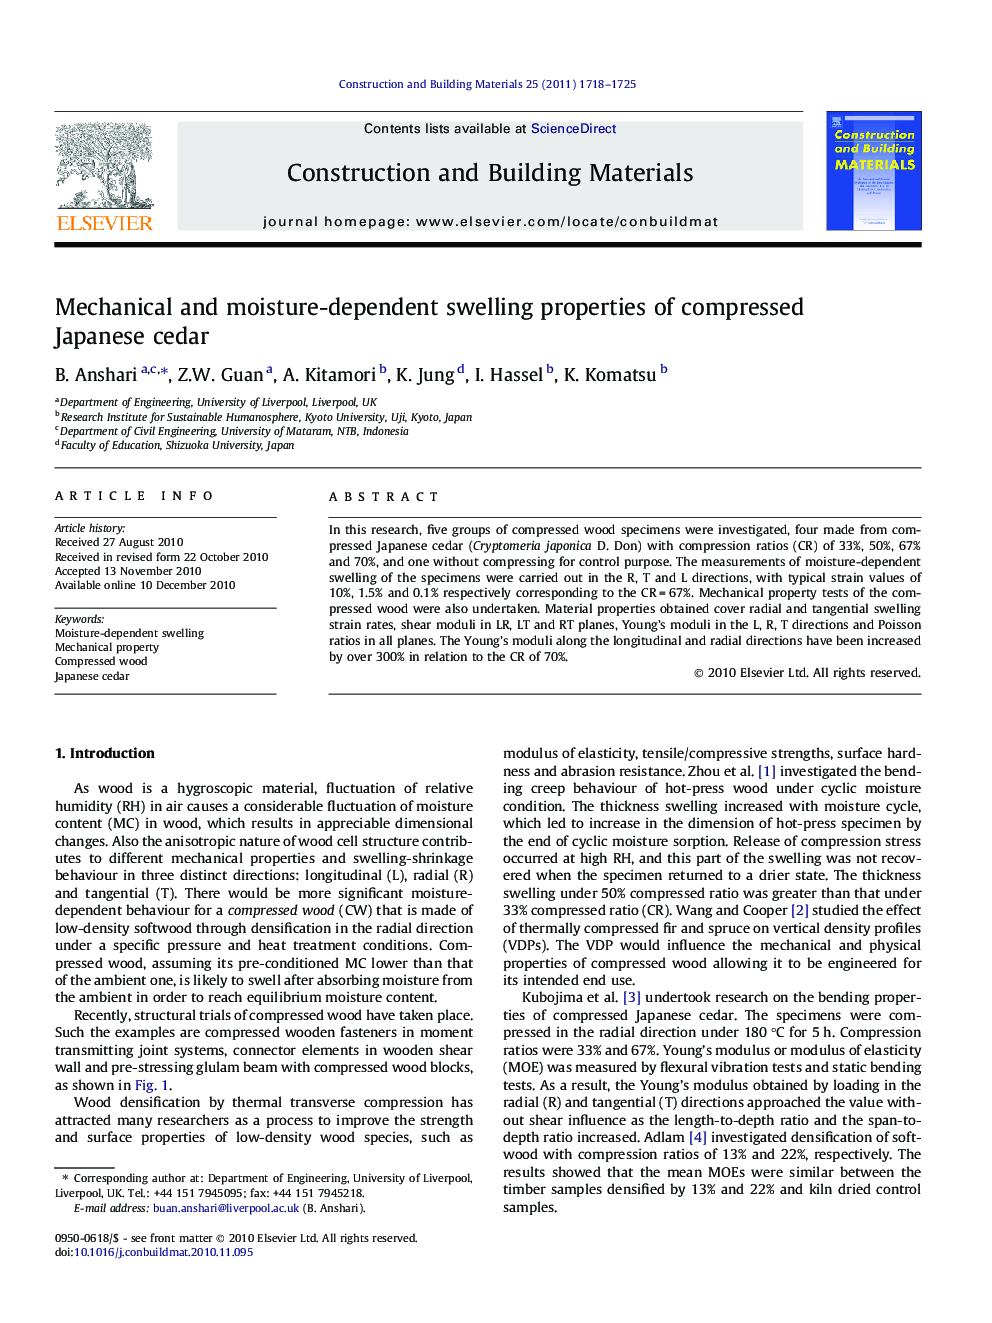 Mechanical and moisture-dependent swelling properties of compressed Japanese cedar